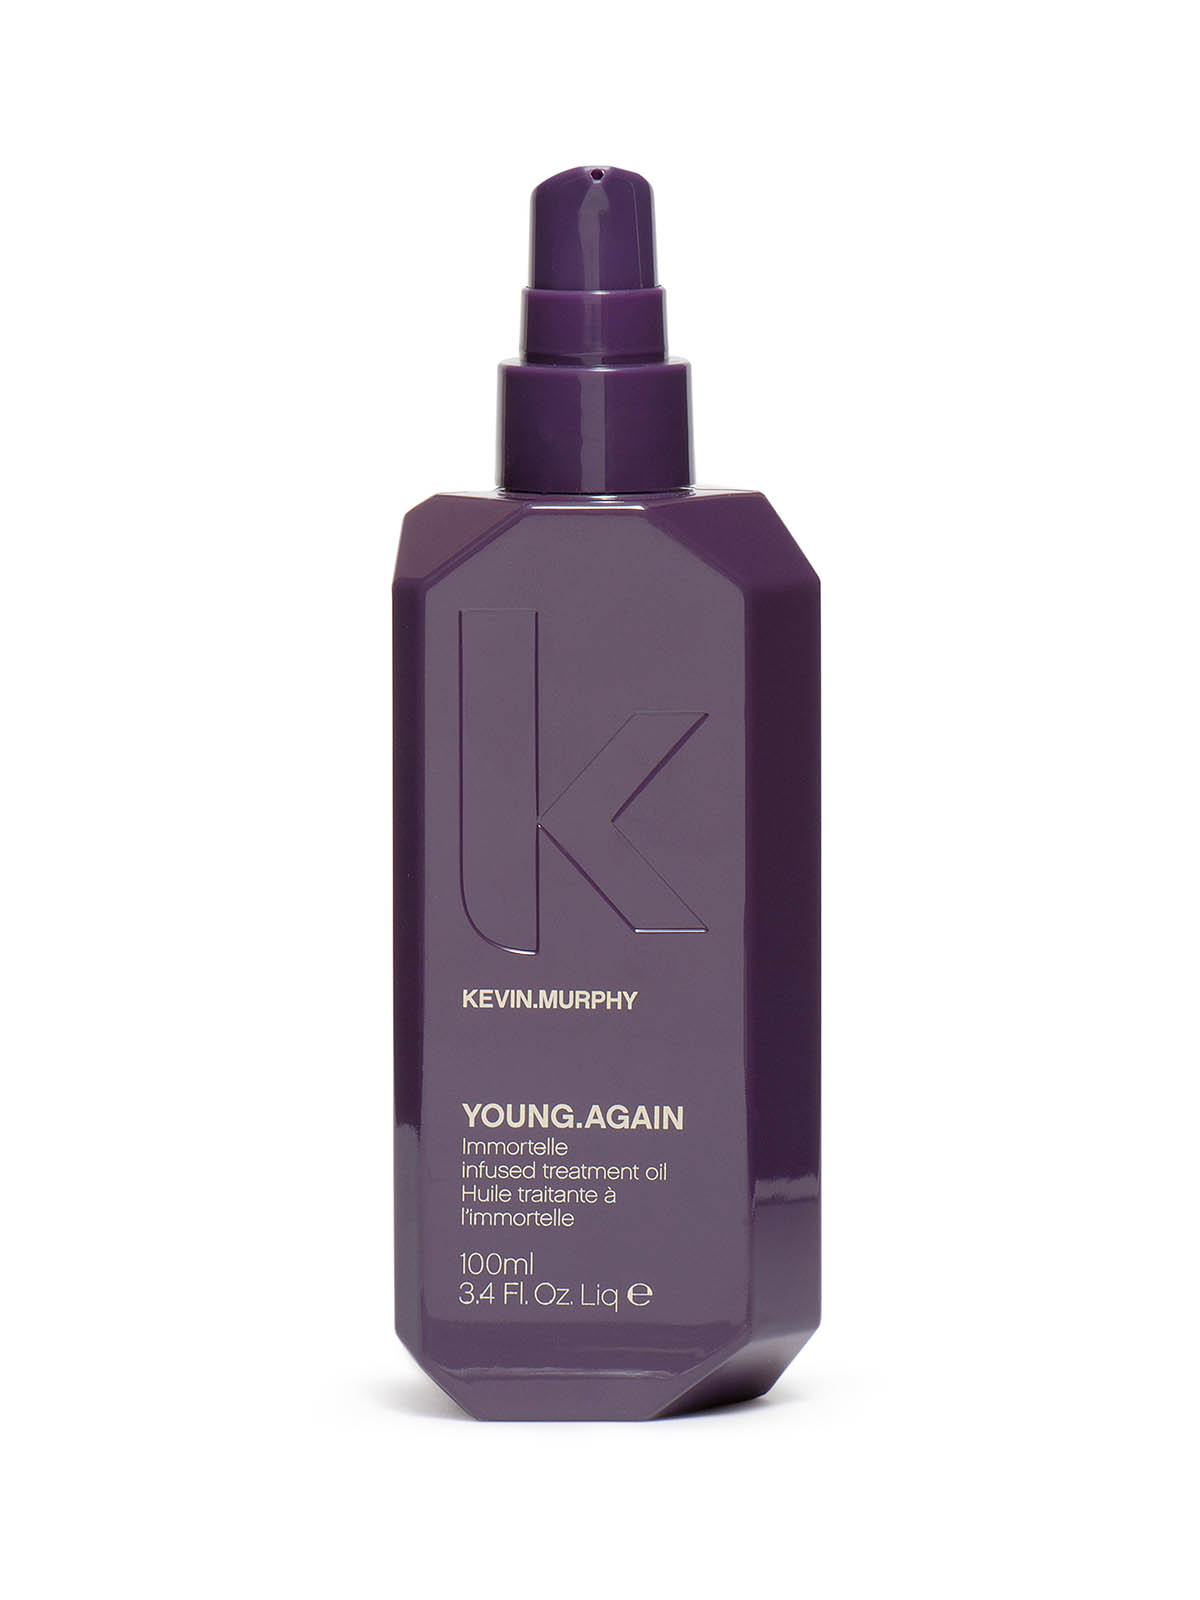 KEVIN.MURPHY YOUNG.AGAIN